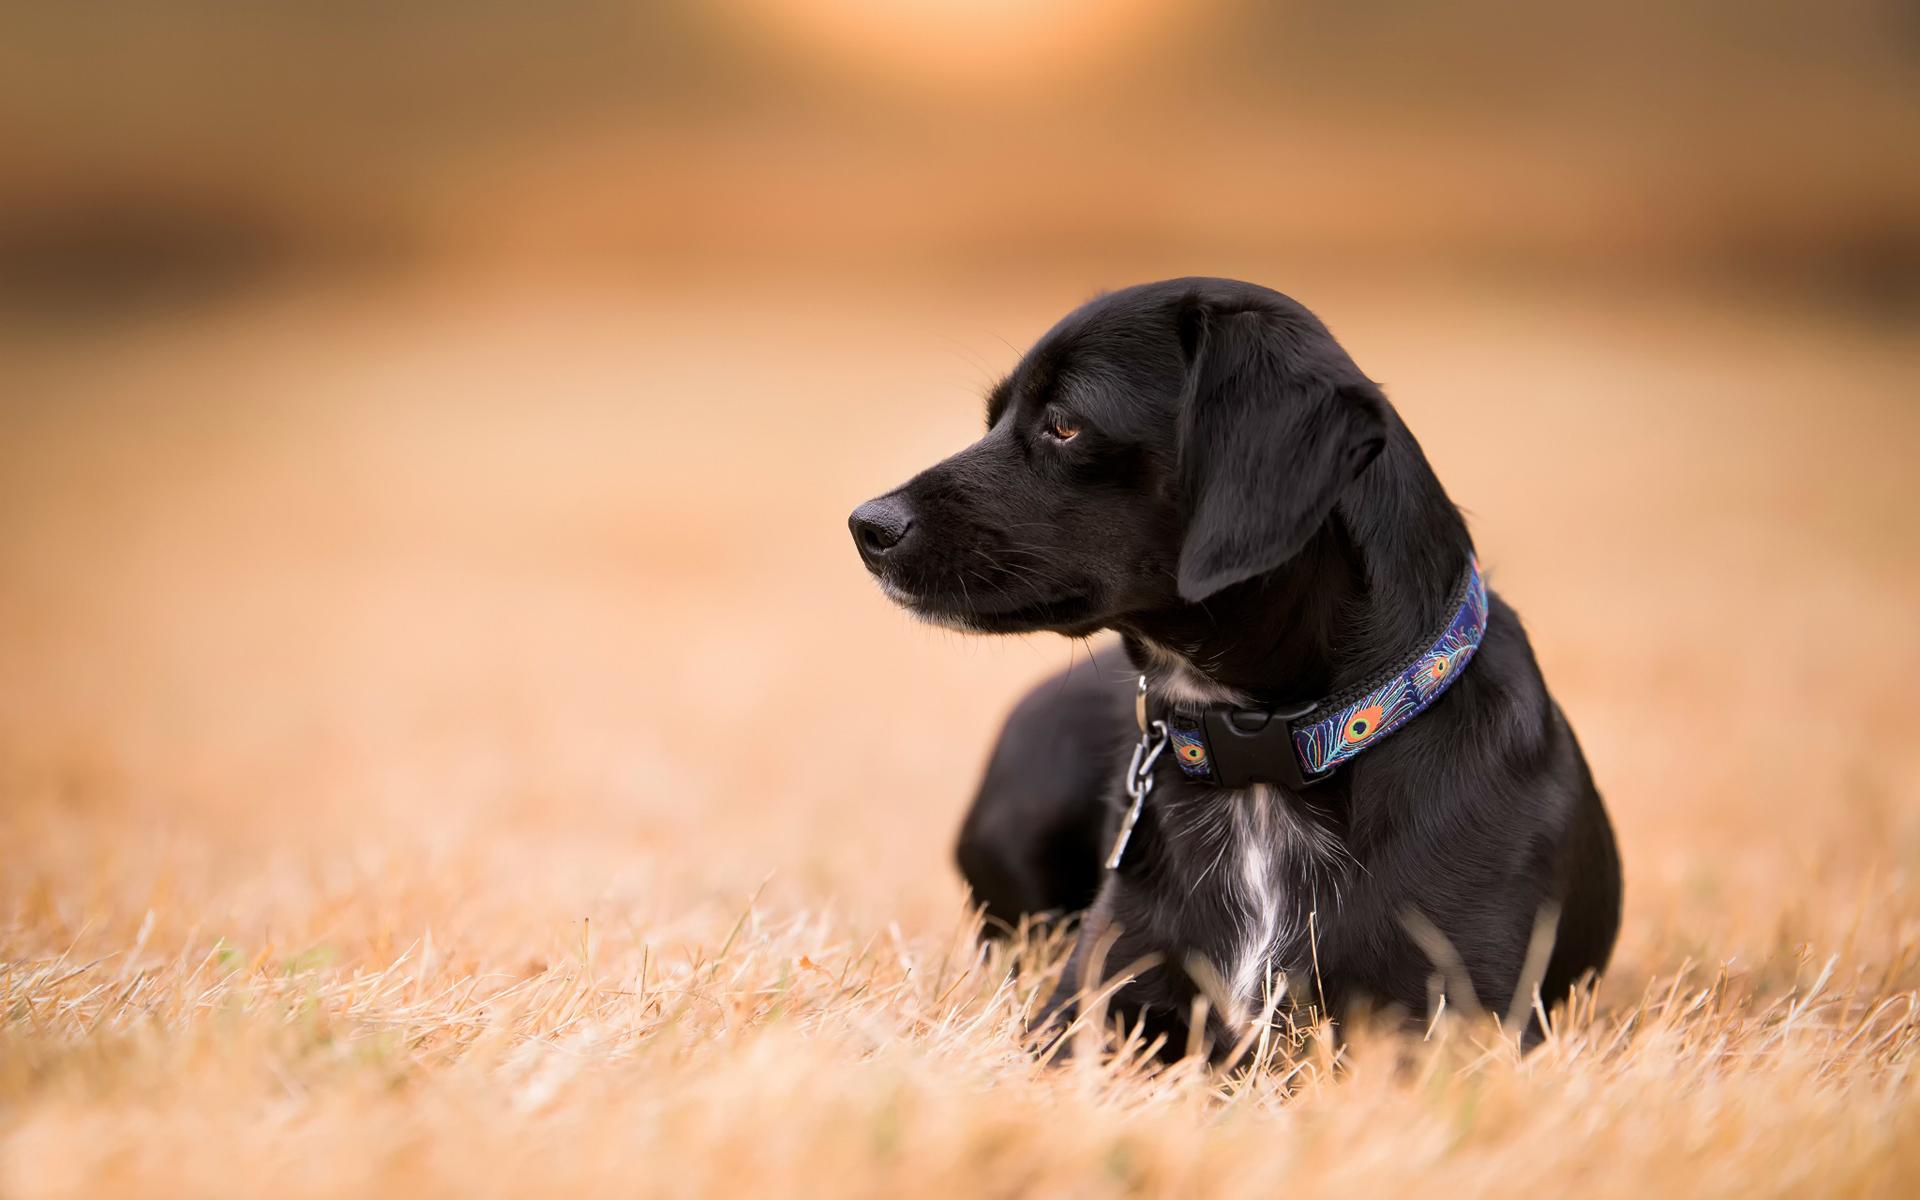 Relaxed Black Dog Wallpaper and Free